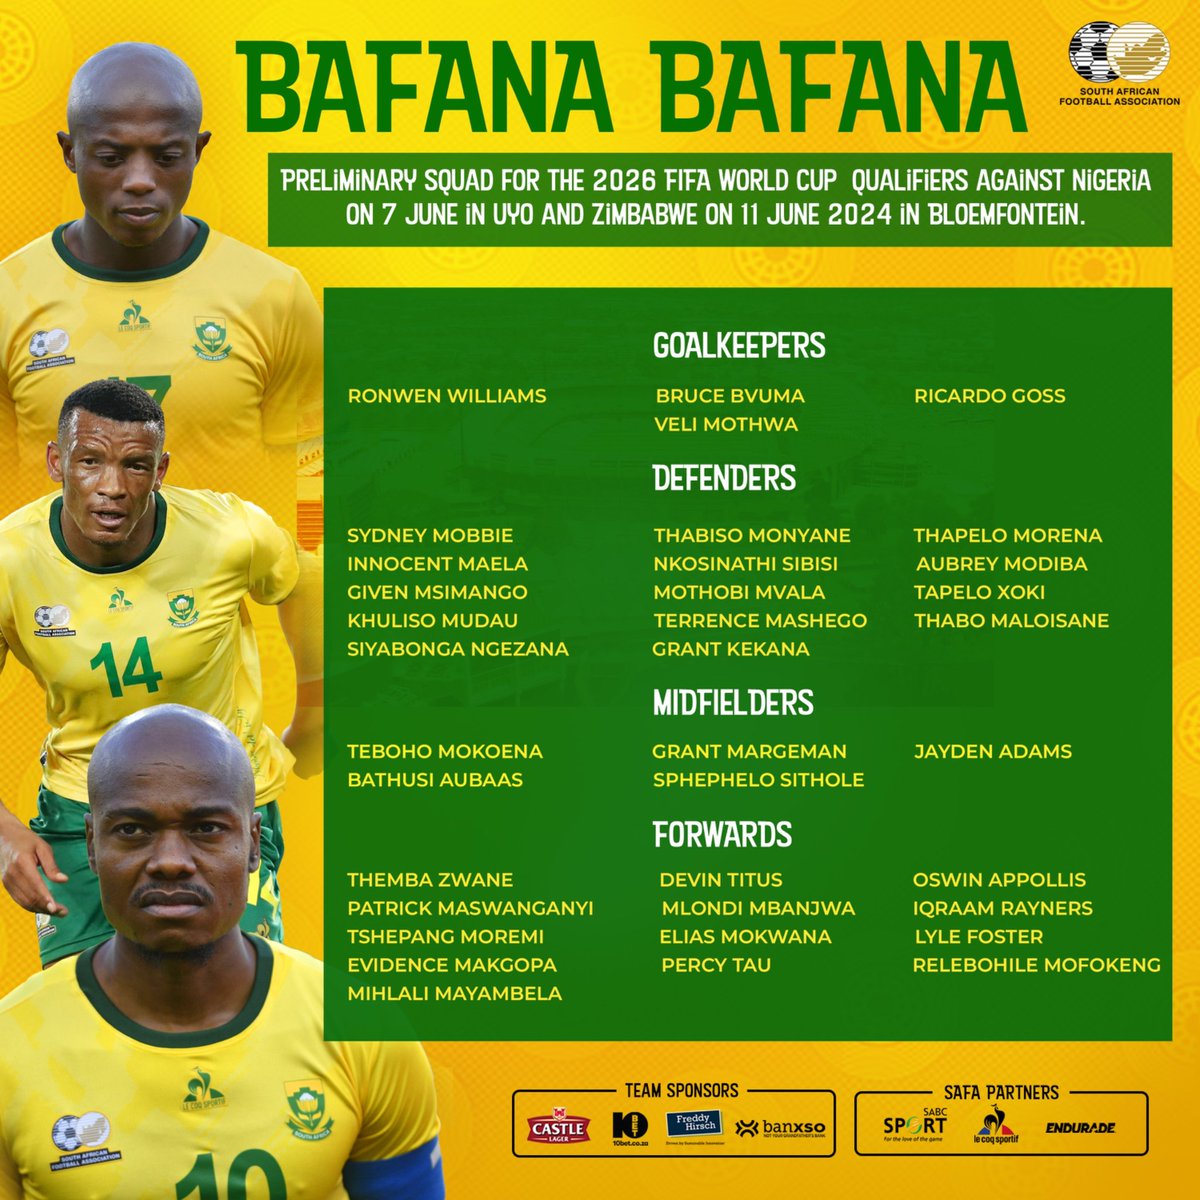 Bafana Bafana coach Hugo Broos announces preliminary squad for the 2026 FIFA World Cup qualifiers against Nigeria and Zimbabwe in June